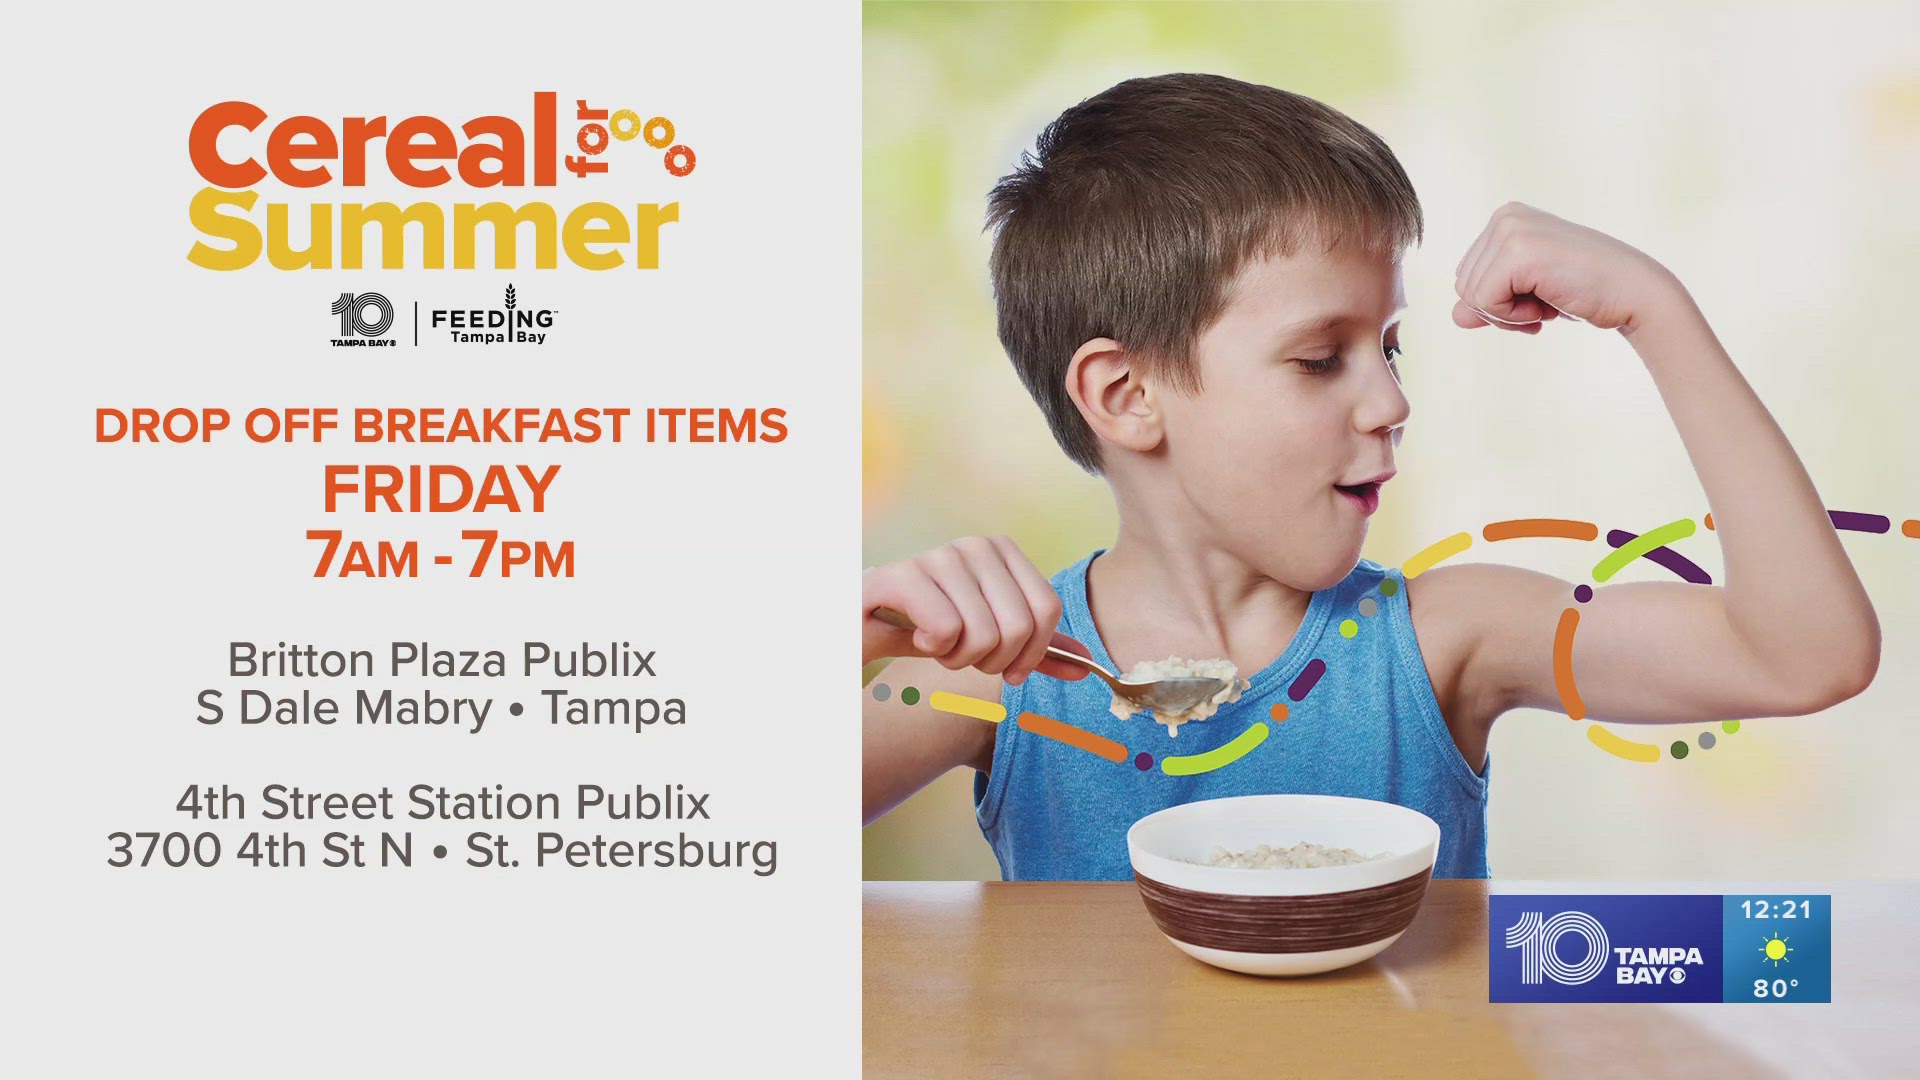 On Friday, May 3, 10 Tampa Bay and Feeding 10 Tampa Bay will be outside Publix accepting your donations to help feed hungry children across the Tampa Bay area.